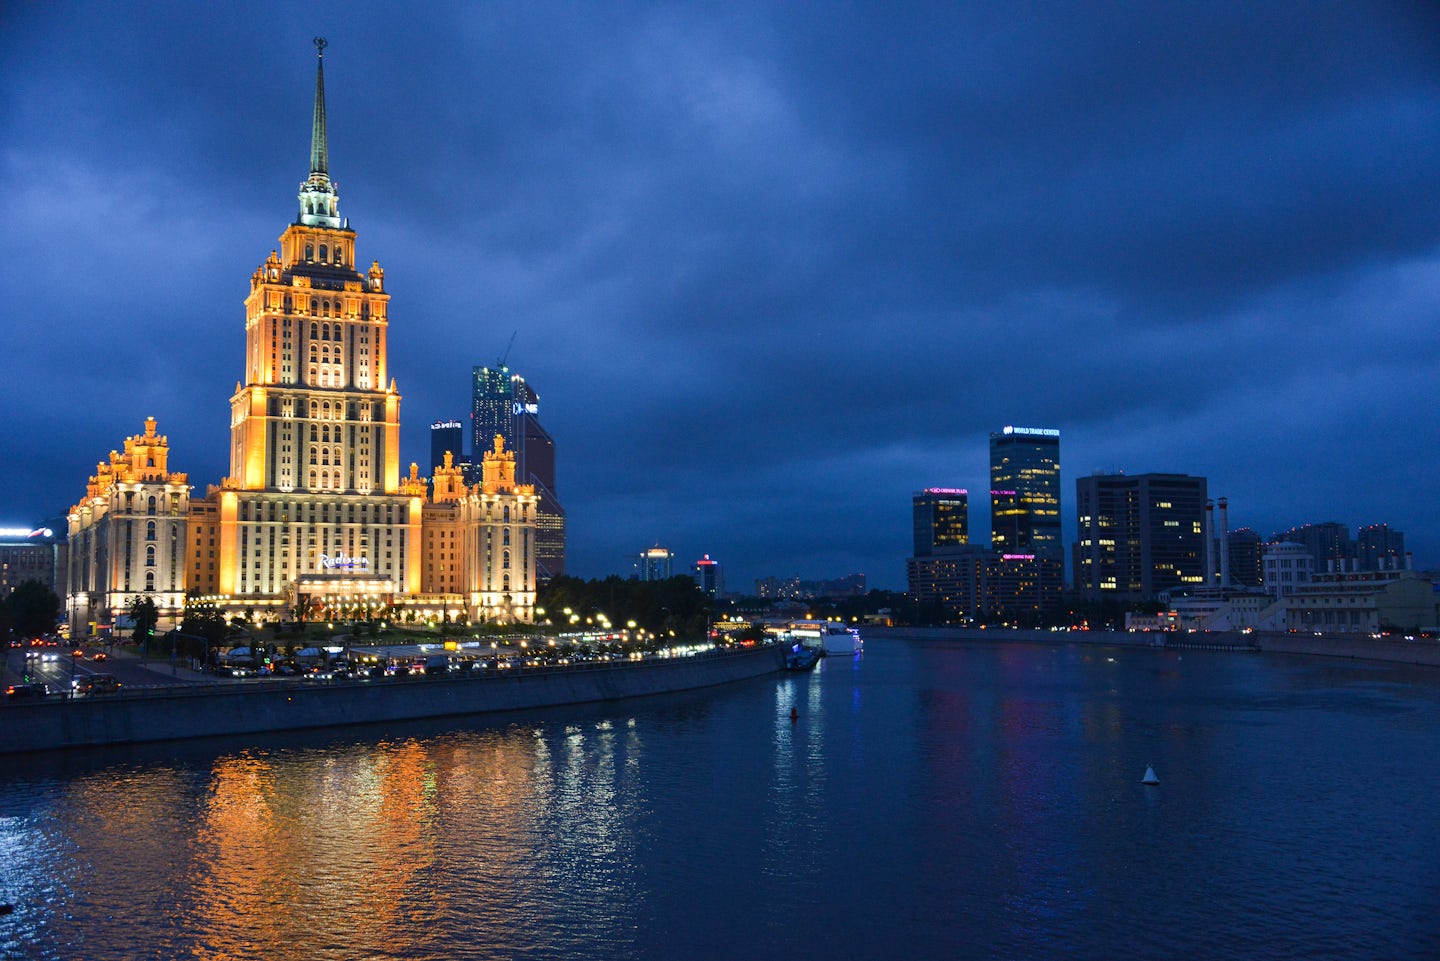 The Radisson Royal Hotel at night in Moscow.